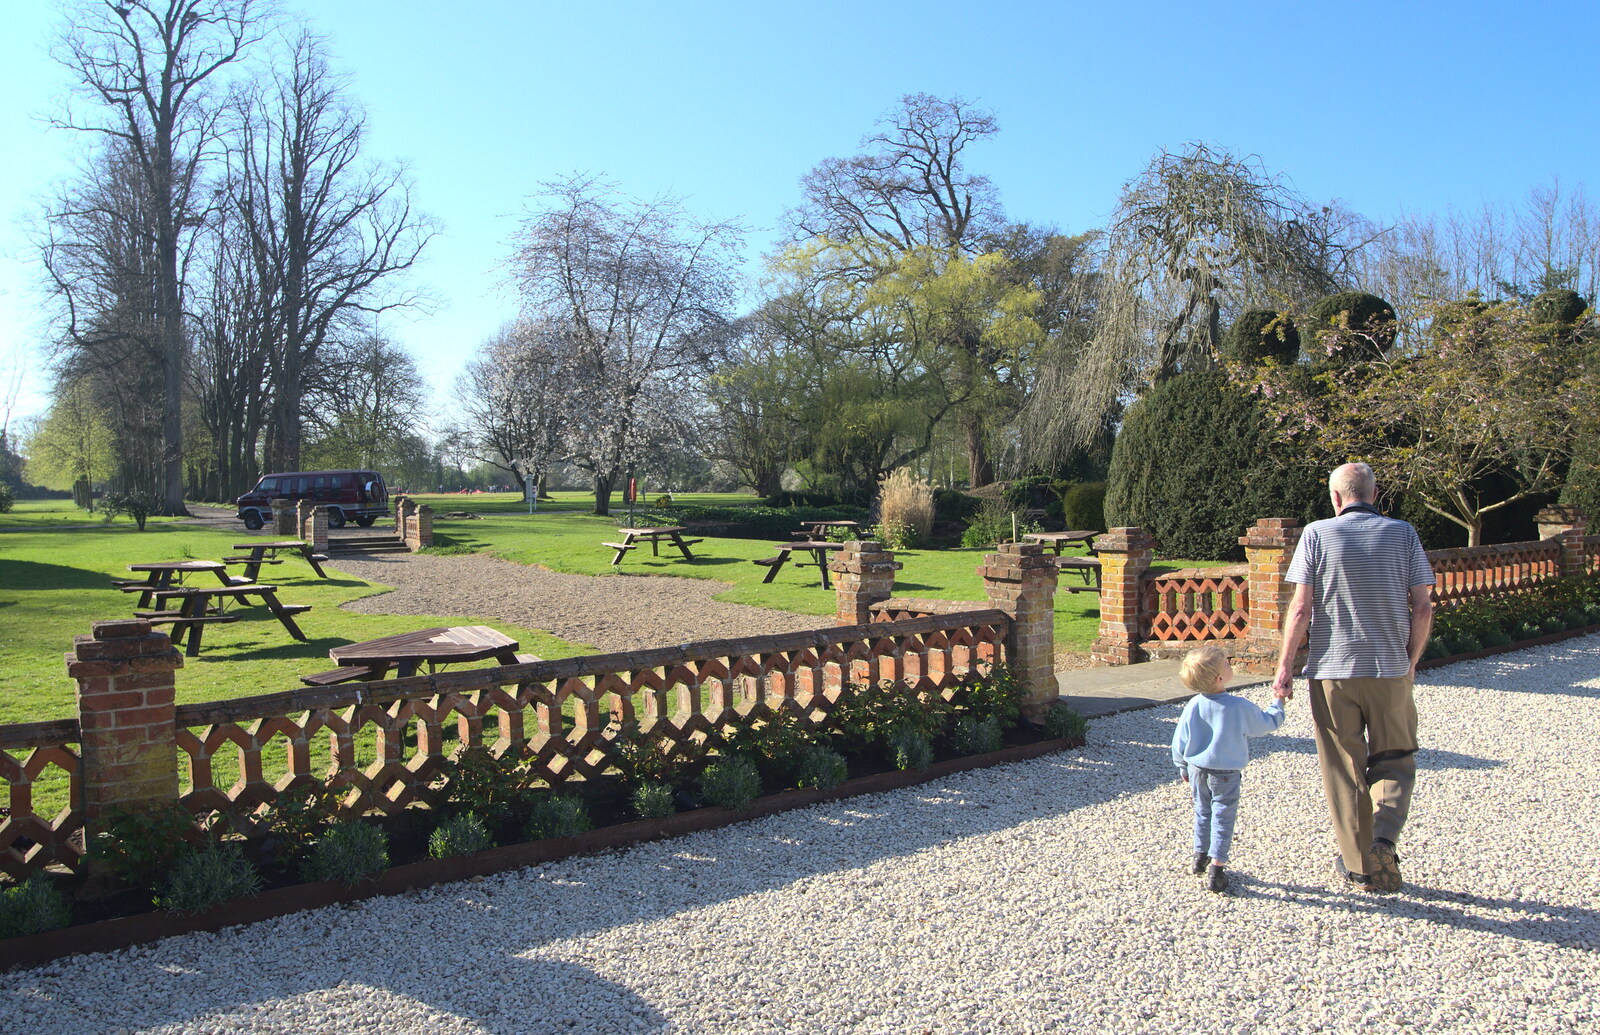 Grandad and Harry go for a walk from The Oaksmere's First Year Anniversary, Brome, Suffolk - 23rd April 2015